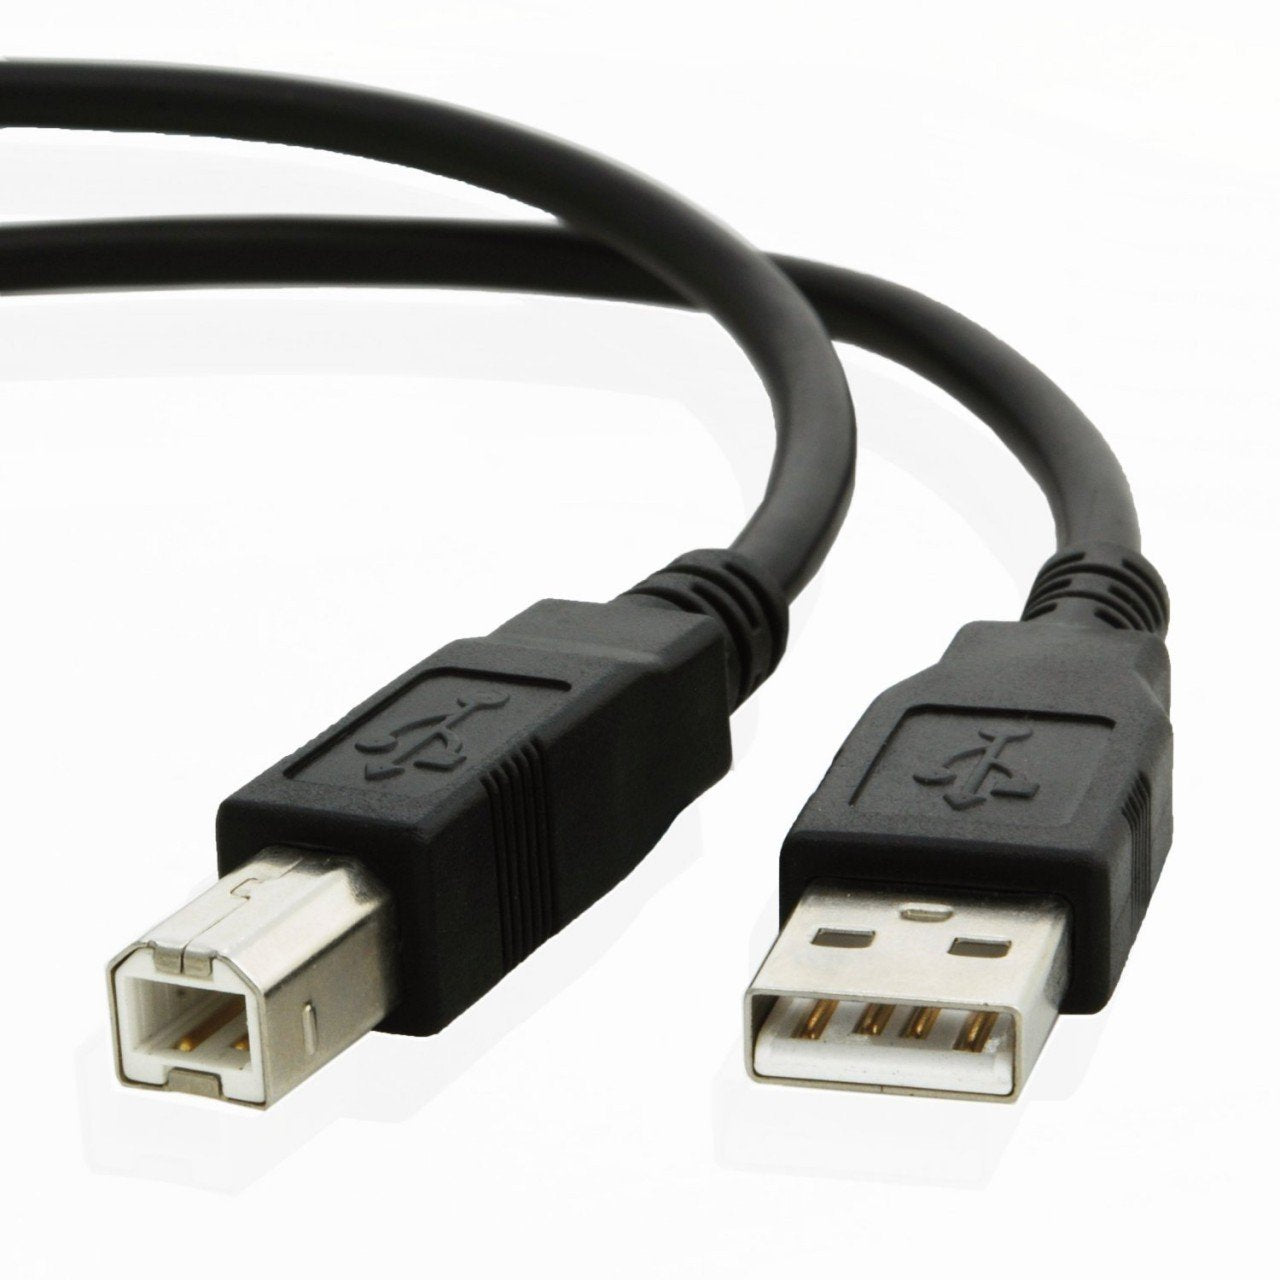 USB cable for Dell S2830dn